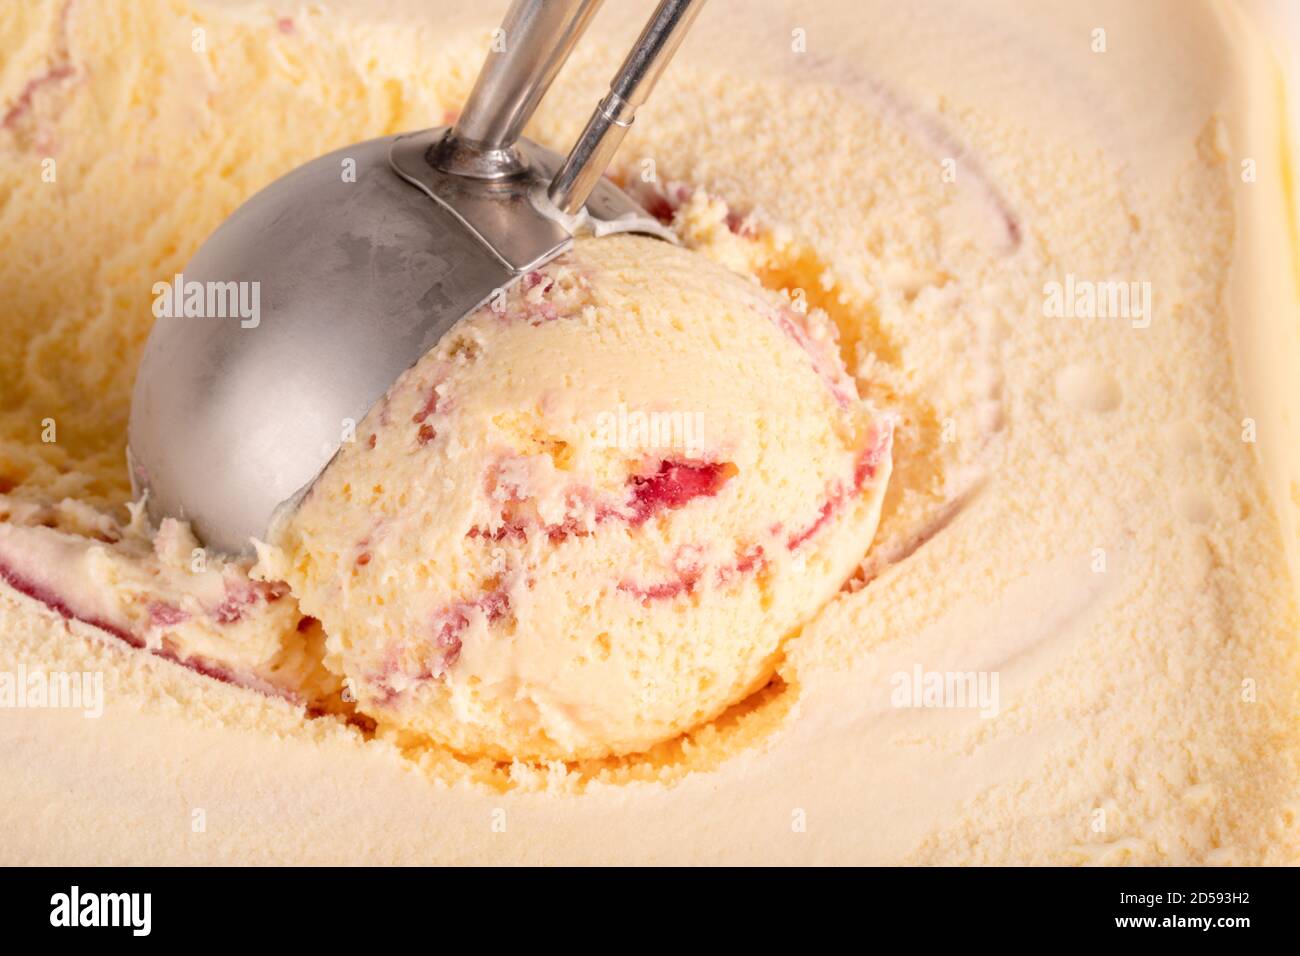 Close up of some raspberry ripple ice cream being served. Stock Photo